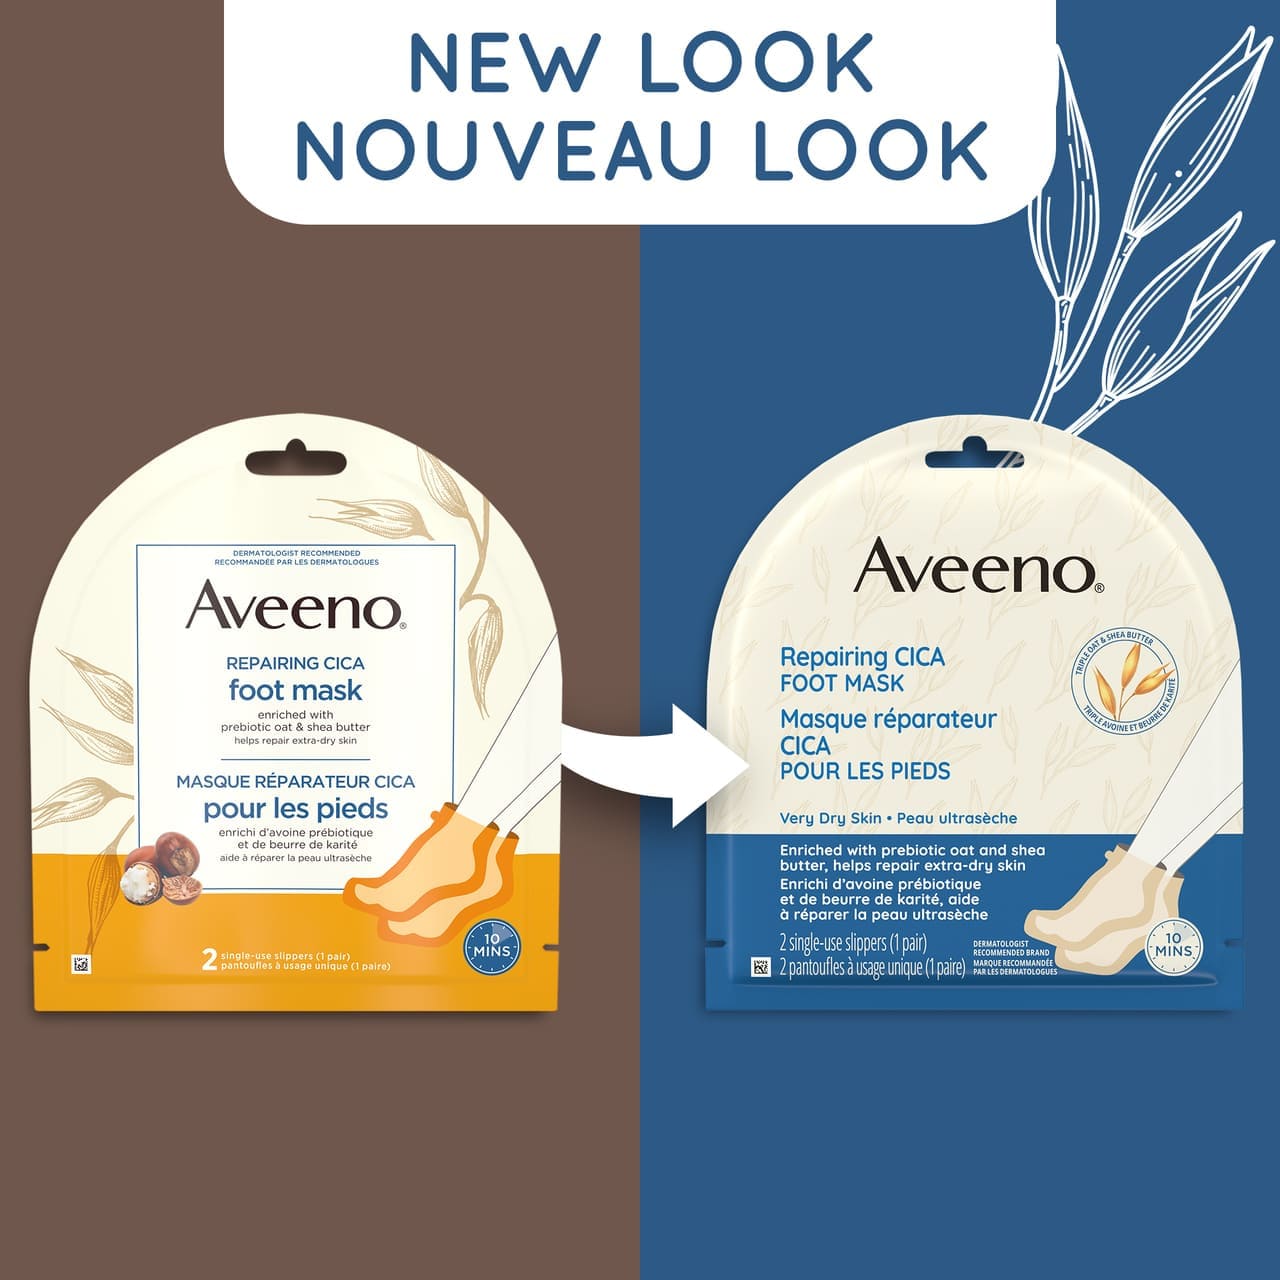 Old and new packaging of AVEENO® Repairing CICA Foot Mask, 2 count, with text 'new look'